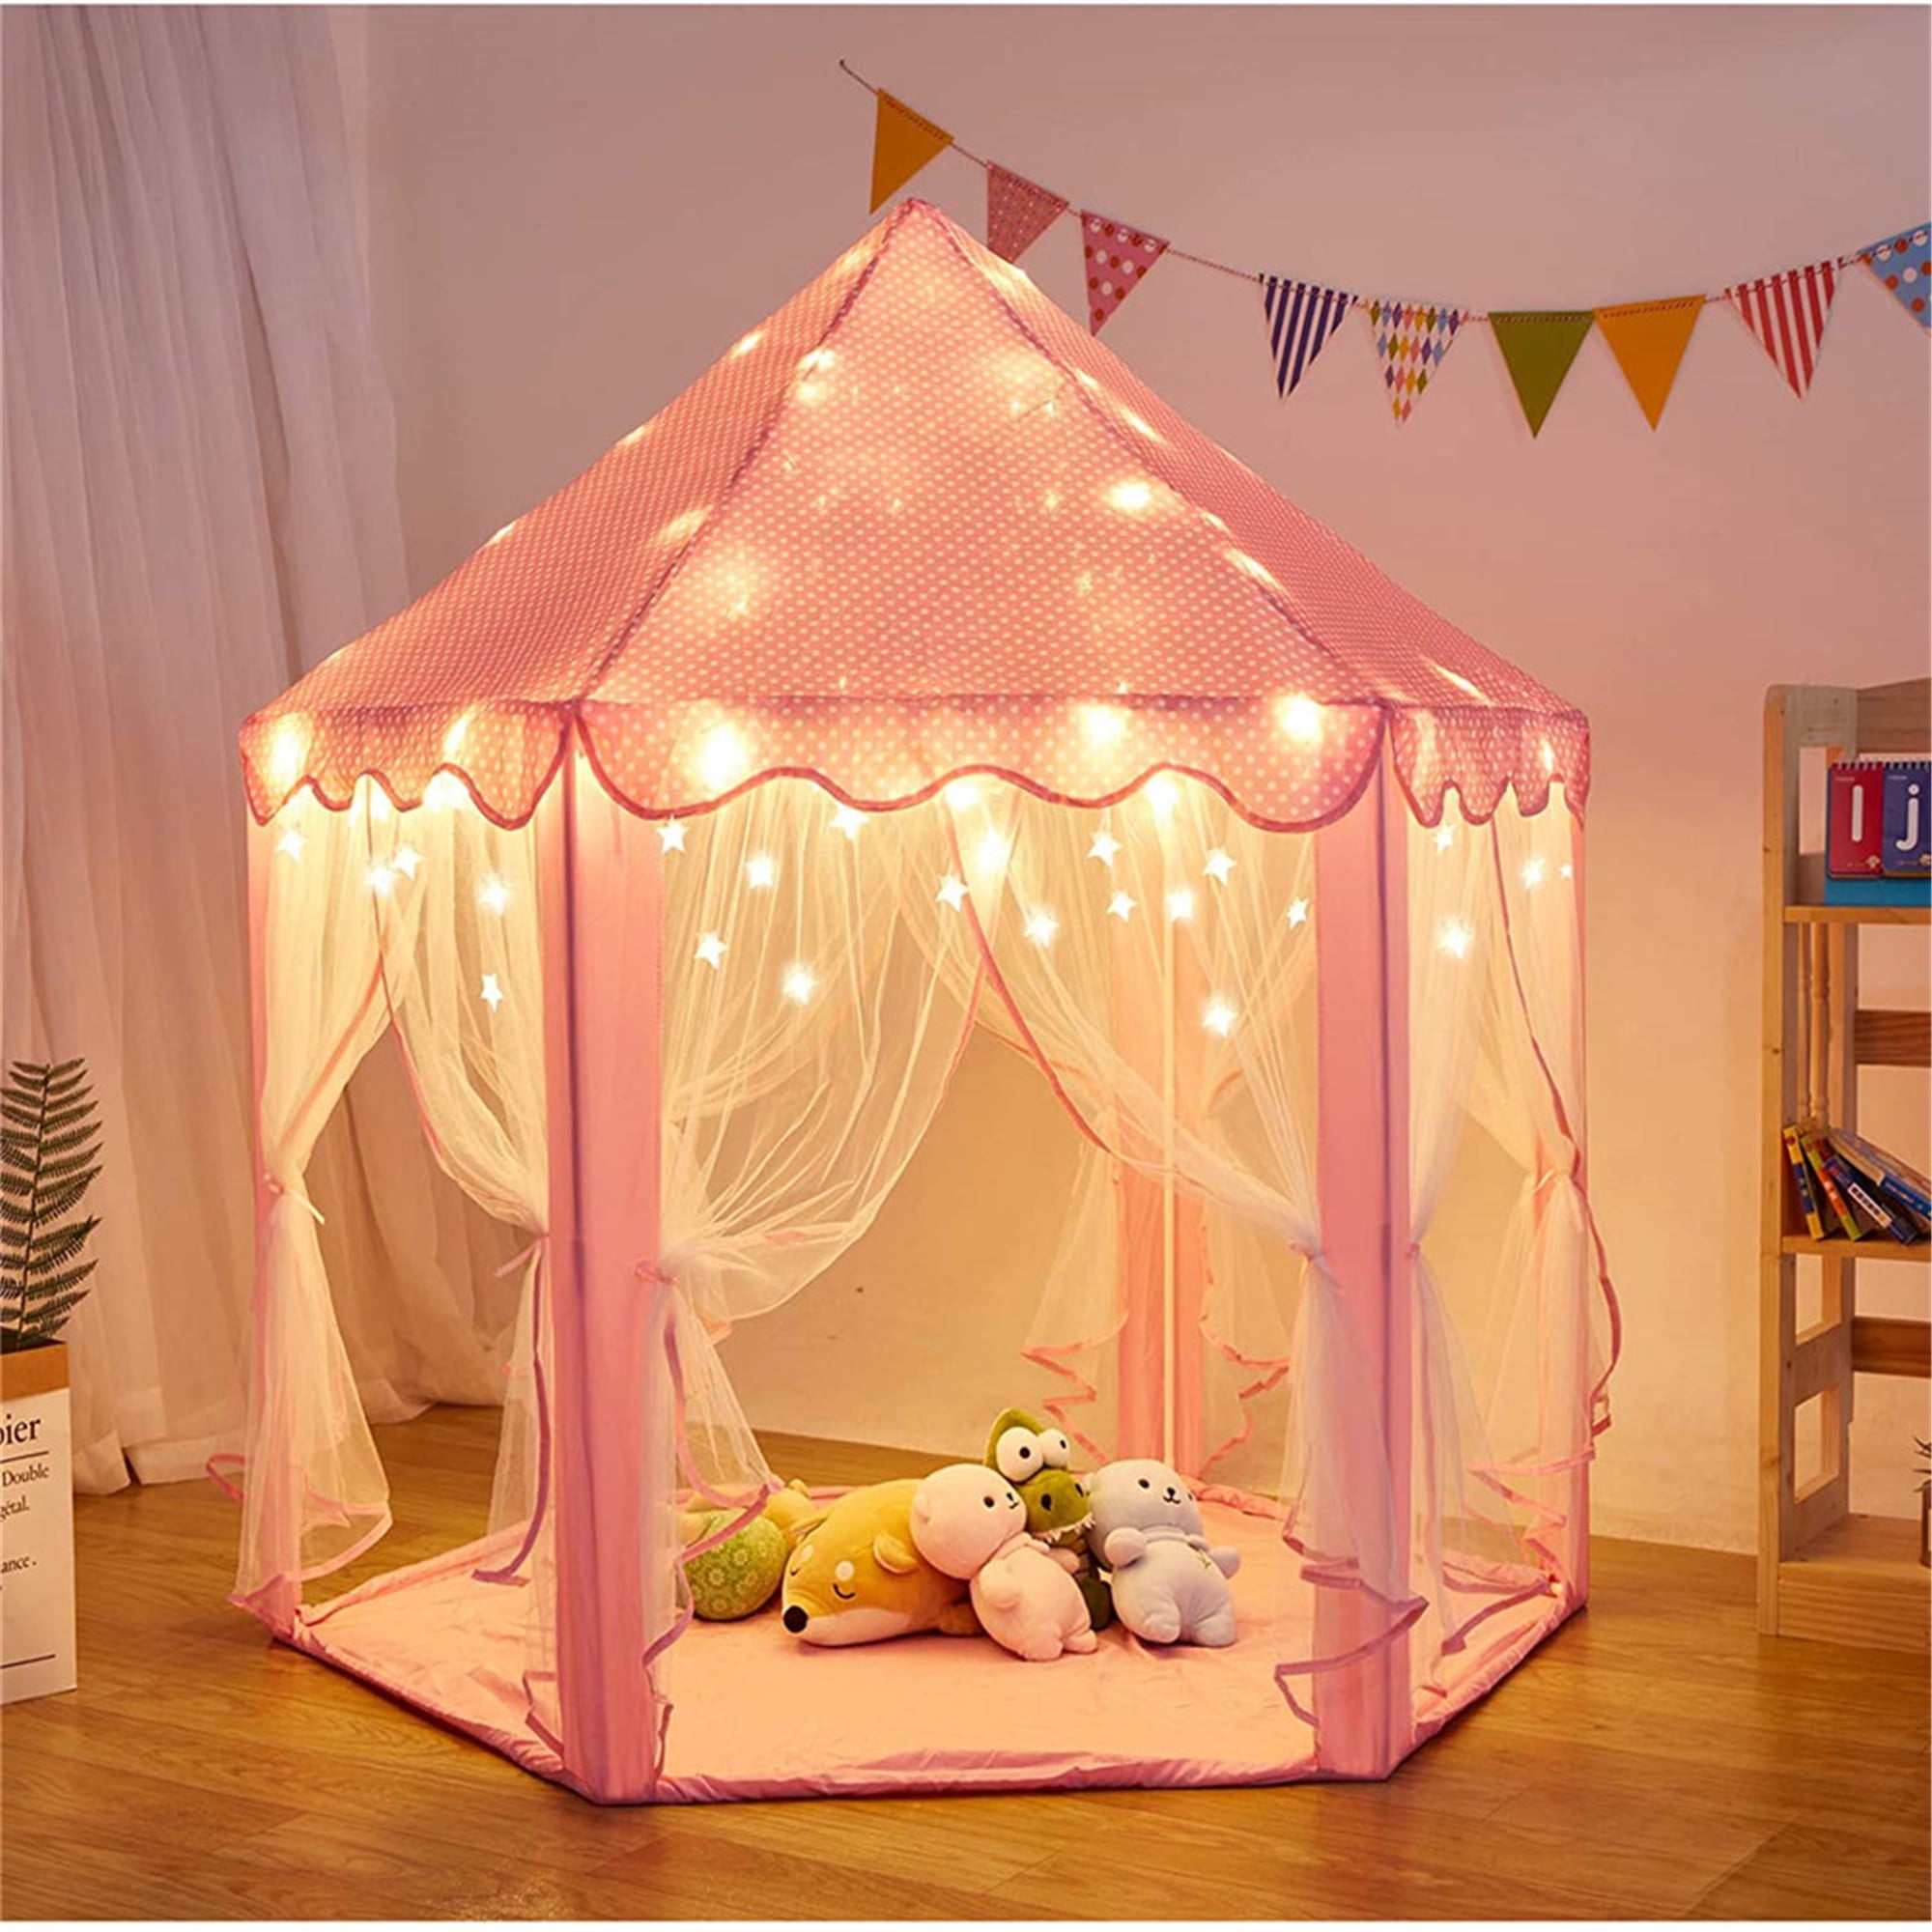 Princess Castle Play Tent With Large Star Lights Little Girls Princess Tent Toy 